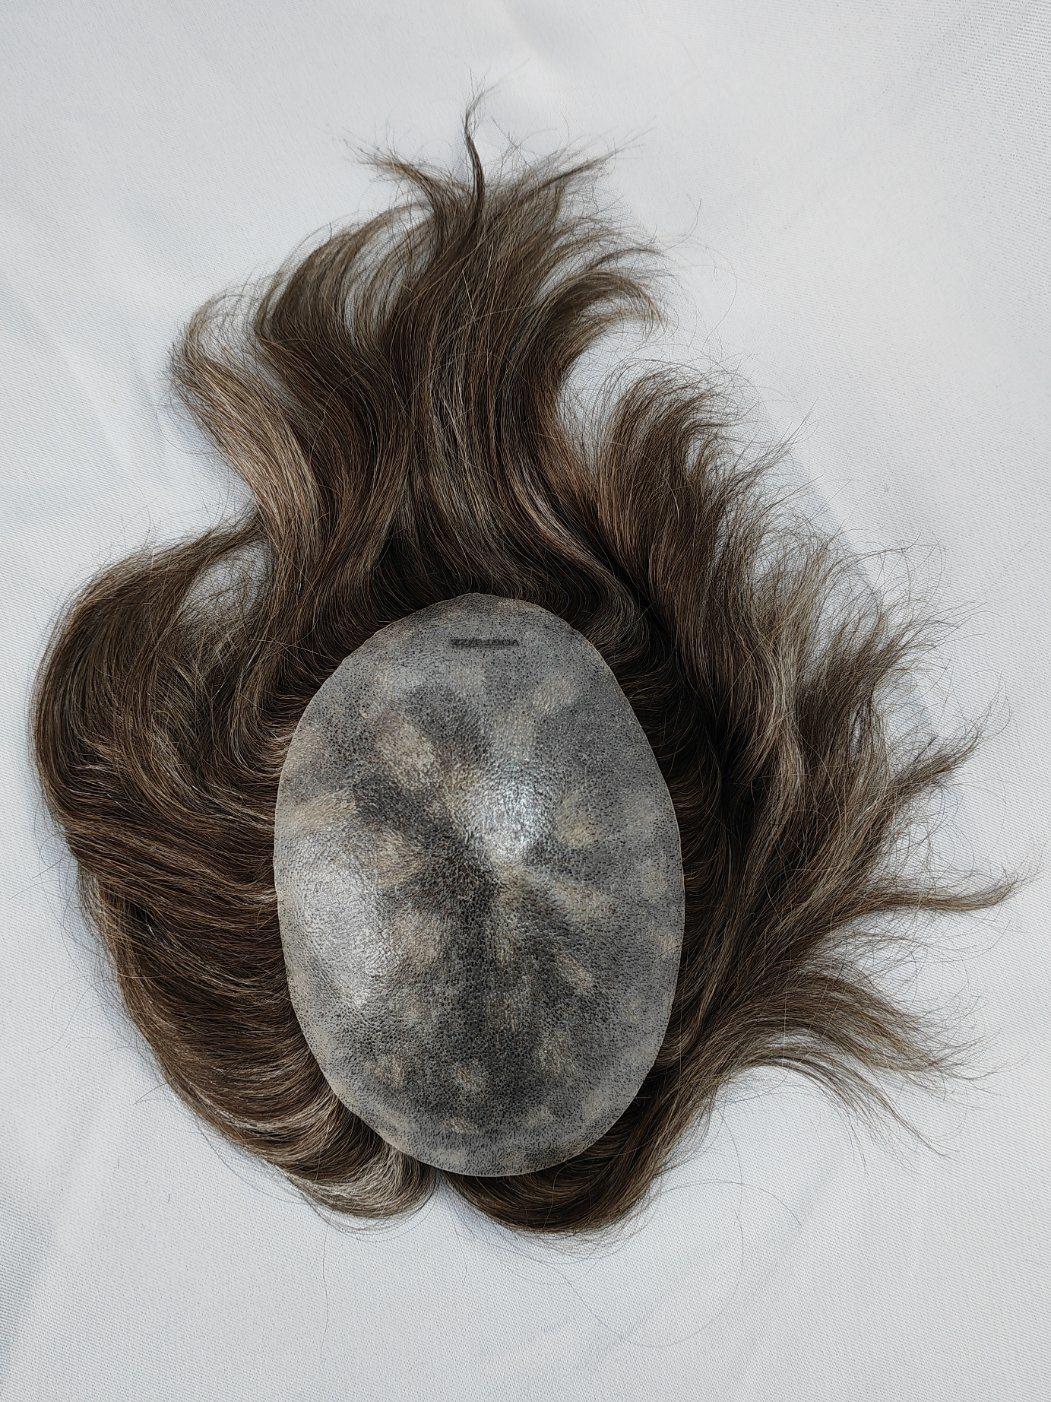 2022 Most Comfortable Custom Made Clear PU Base Injection Wig Made of Remy Human Hair